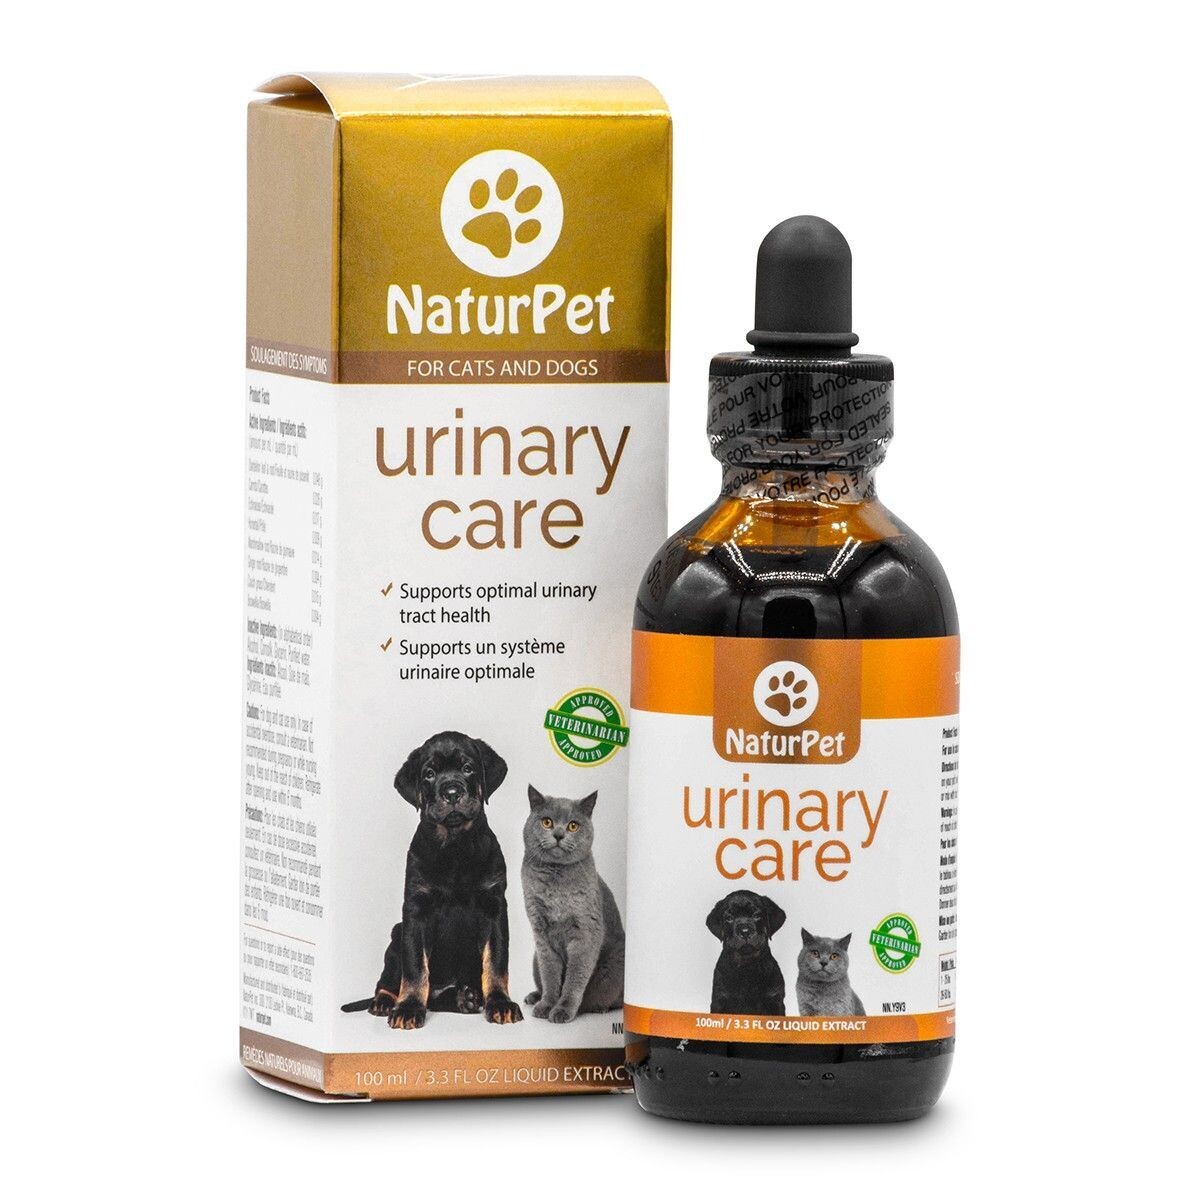 NaturPet Urinary Care for Dogs & Cats - 尿道保健（猫狗通用）